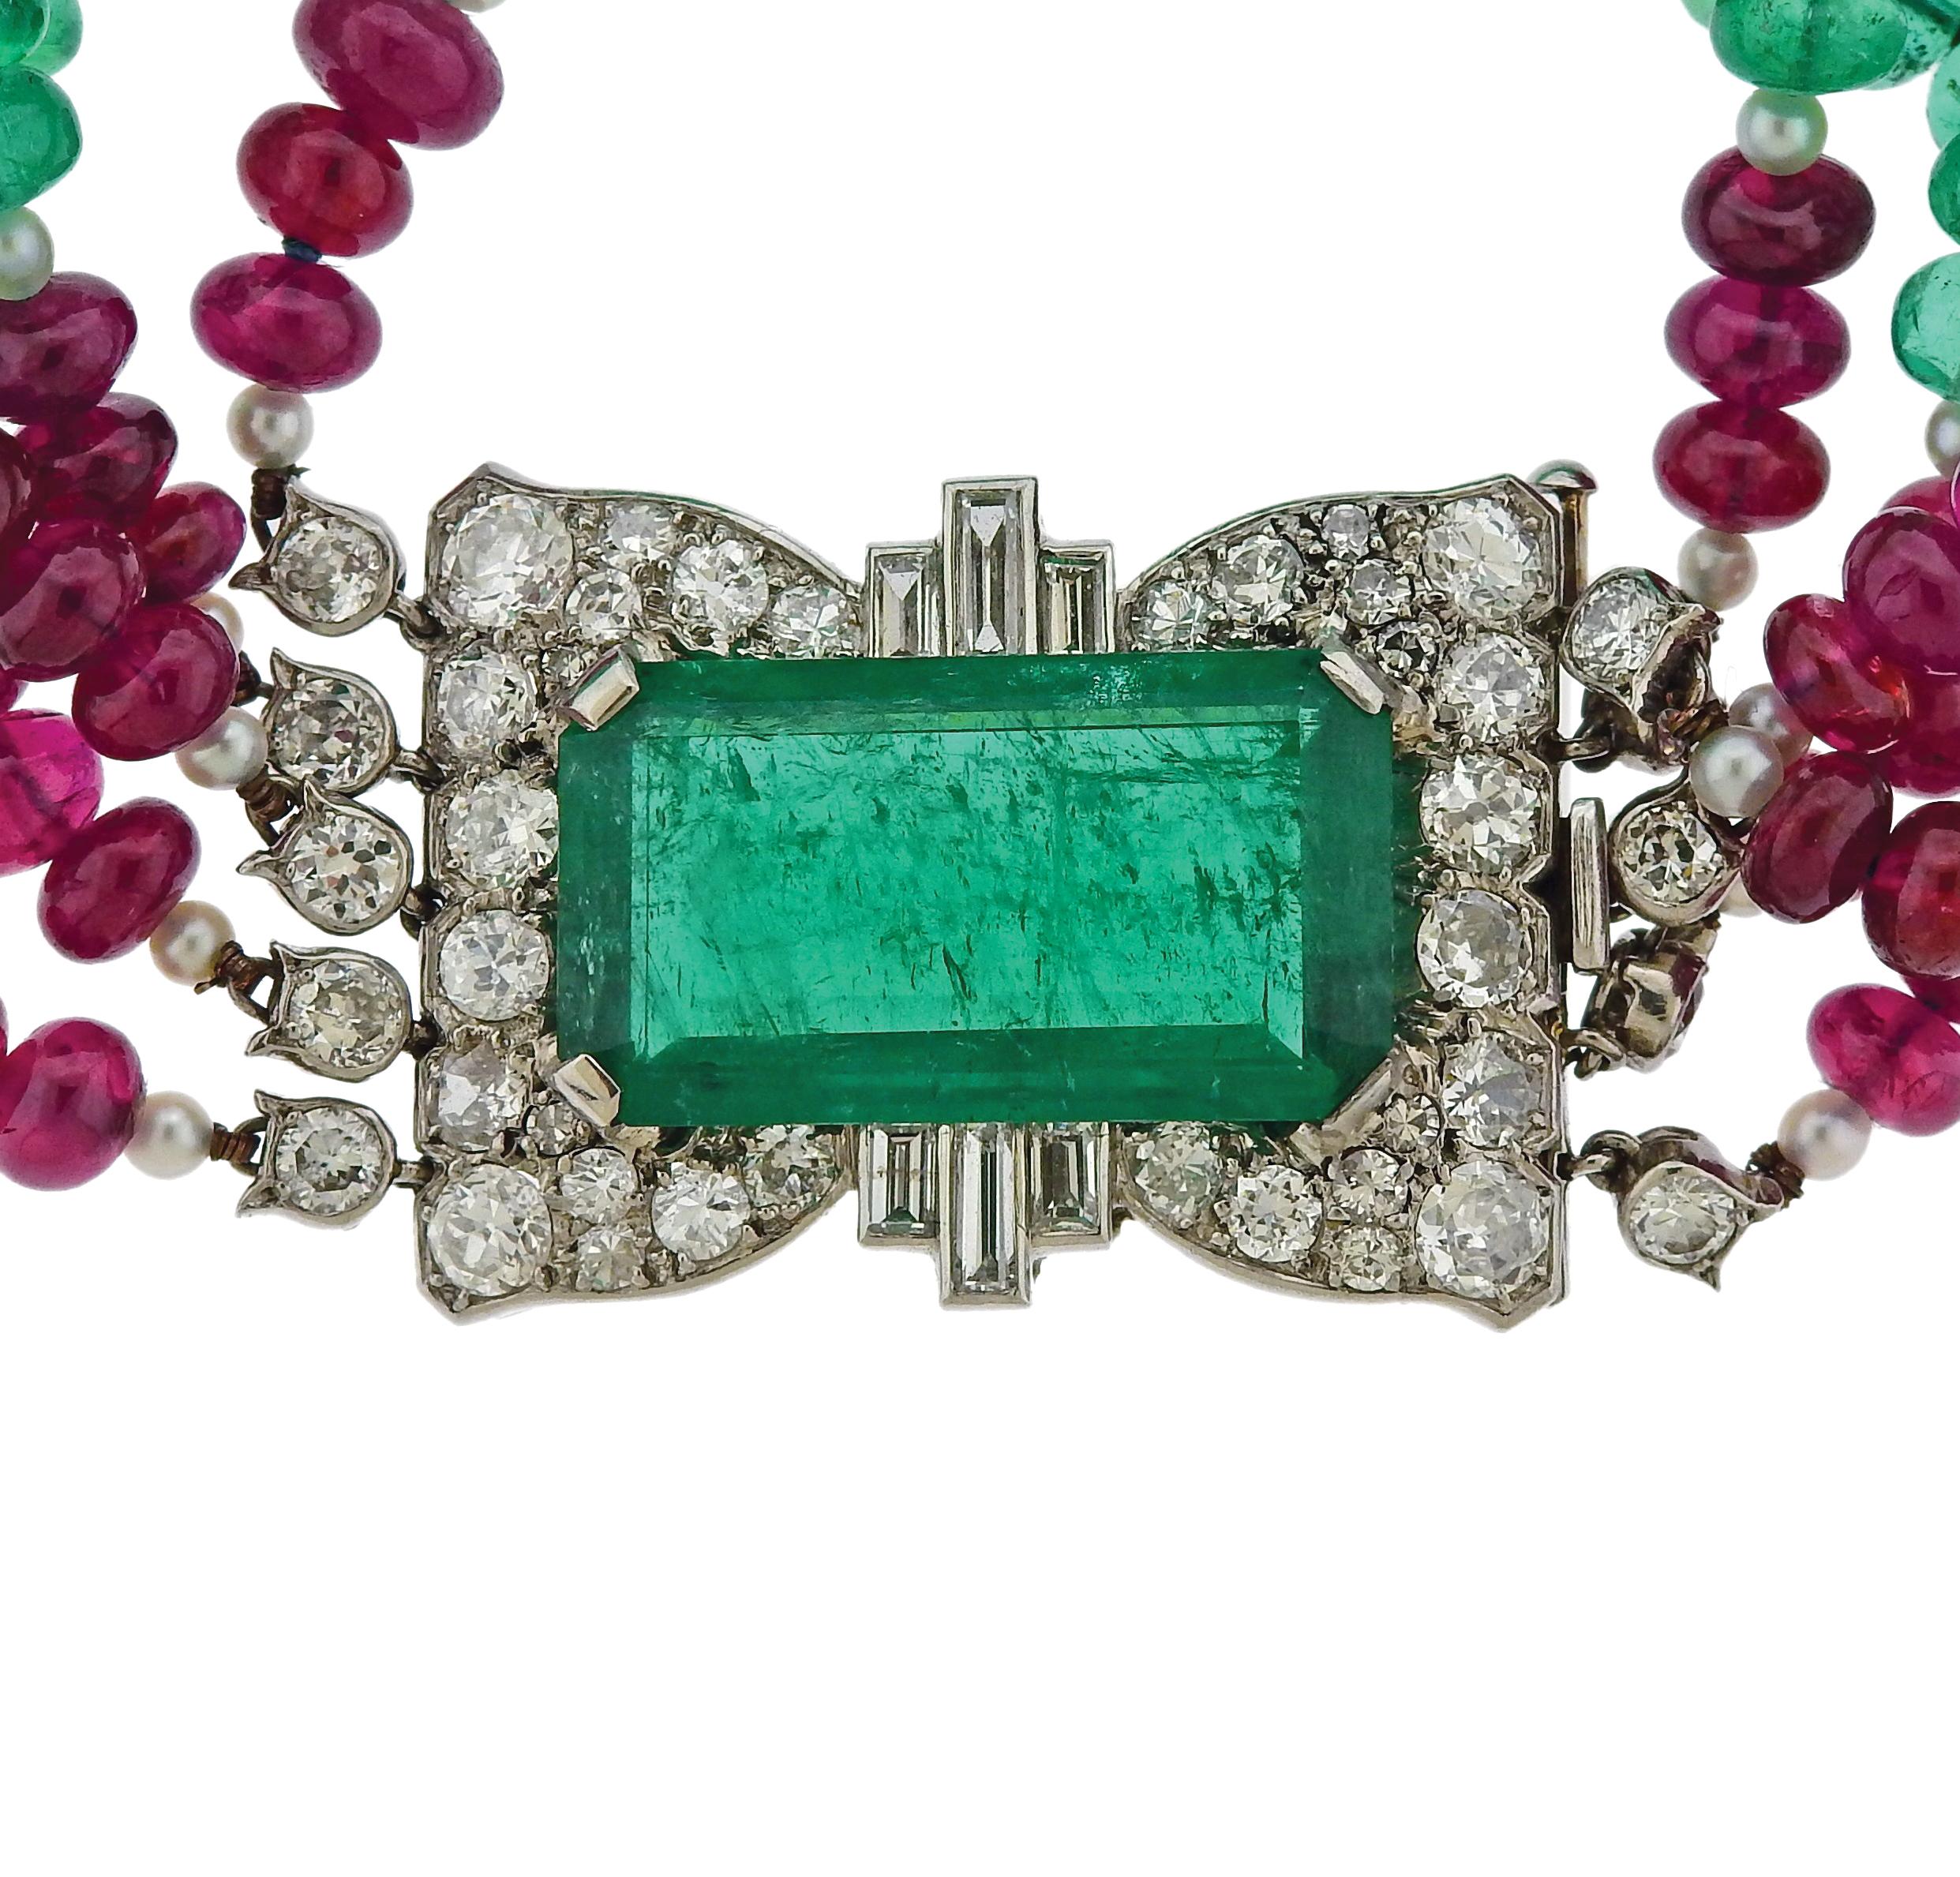 Important Cartier London platinum multistrand bracelet, set with 4.6mm to 6.8mm ruby and emerald beads, pears, and a 10.50ct emerald cut emerald, measuring 21.6mm x 12.2mm x 6mm, surrounded with approx. 3.30ctw in diamonds. The bracelet is 7